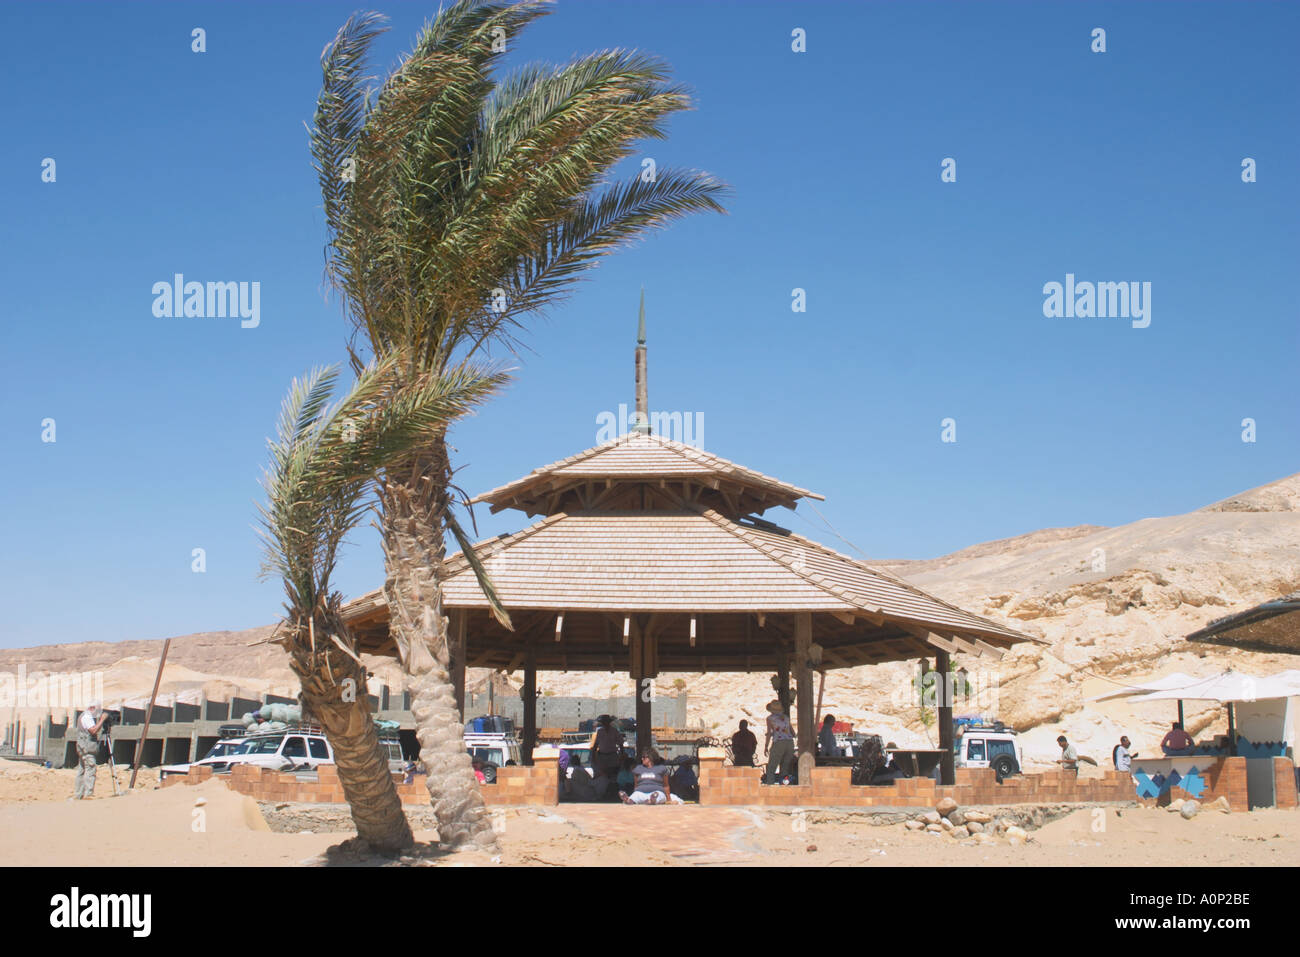 A palm tree and bandstand on the beach at Hamam Faraon Pharaoh s Hot Springs the Red Sea Western Sinai Egypt Stock Photo